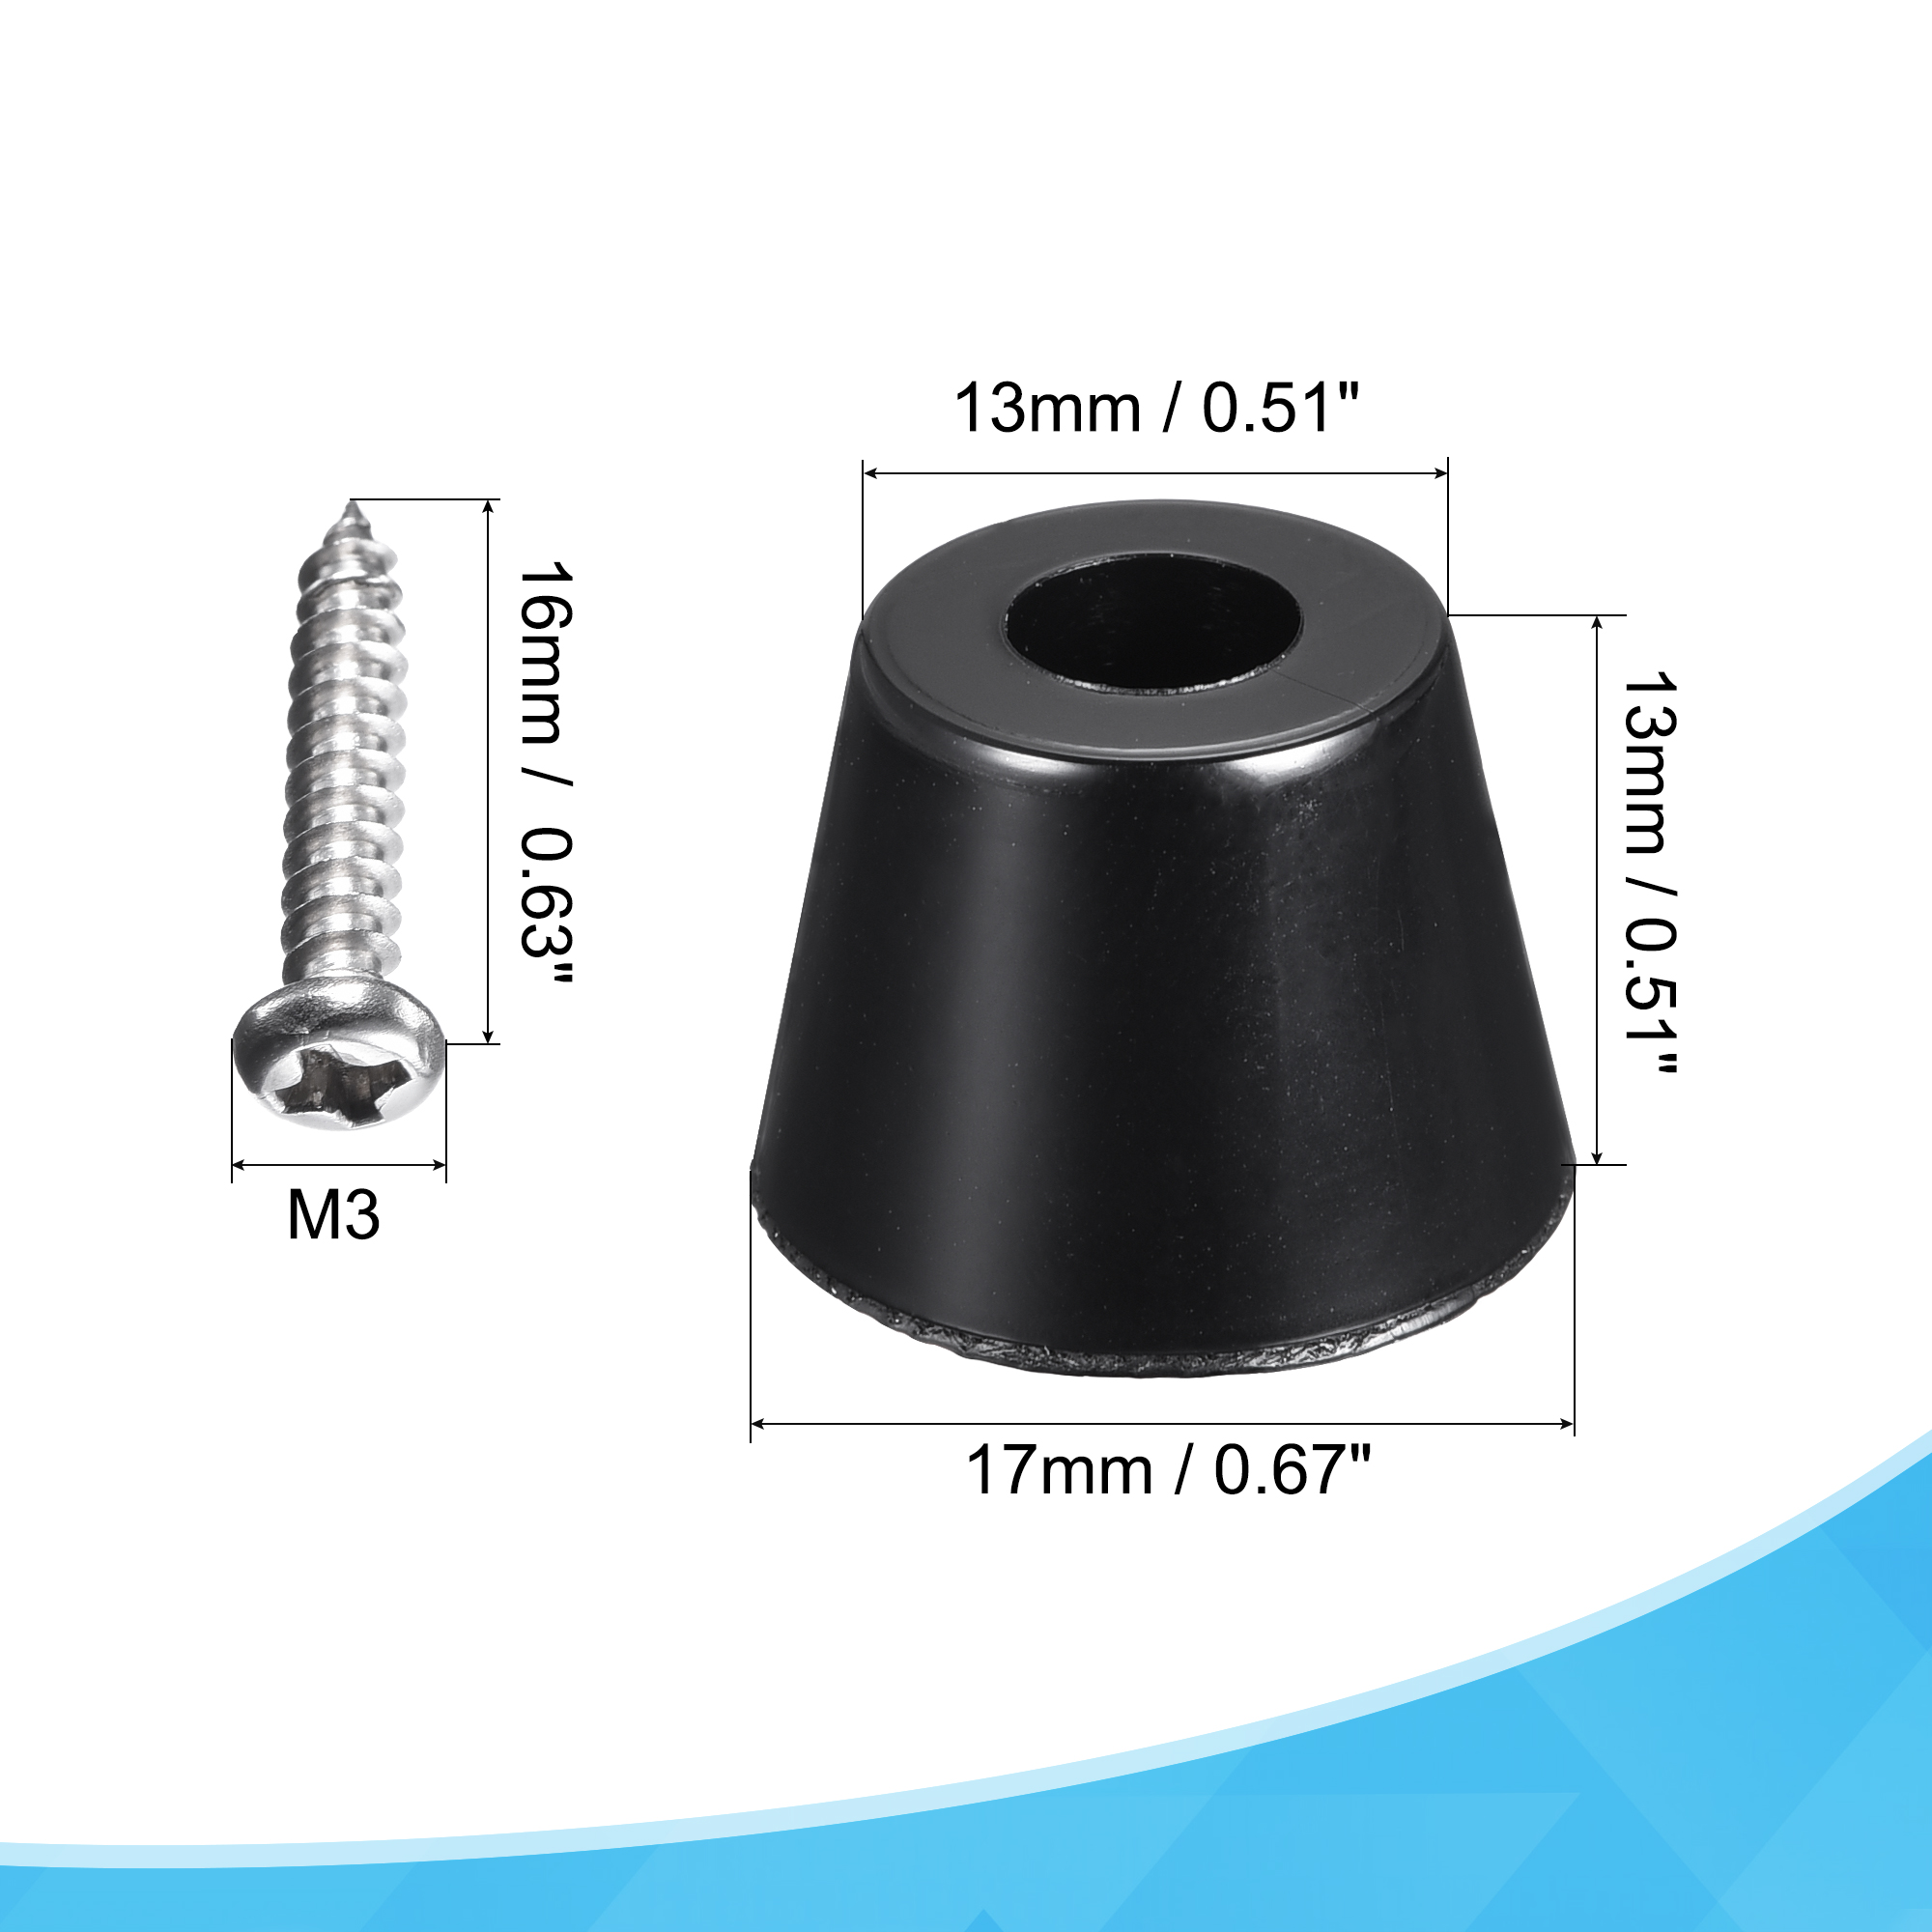 Uxcell 0.67" W x  0.51" H Rubber Bumper Feet, Stainless Steel Screws and Washer 20 Pack - image 3 of 5